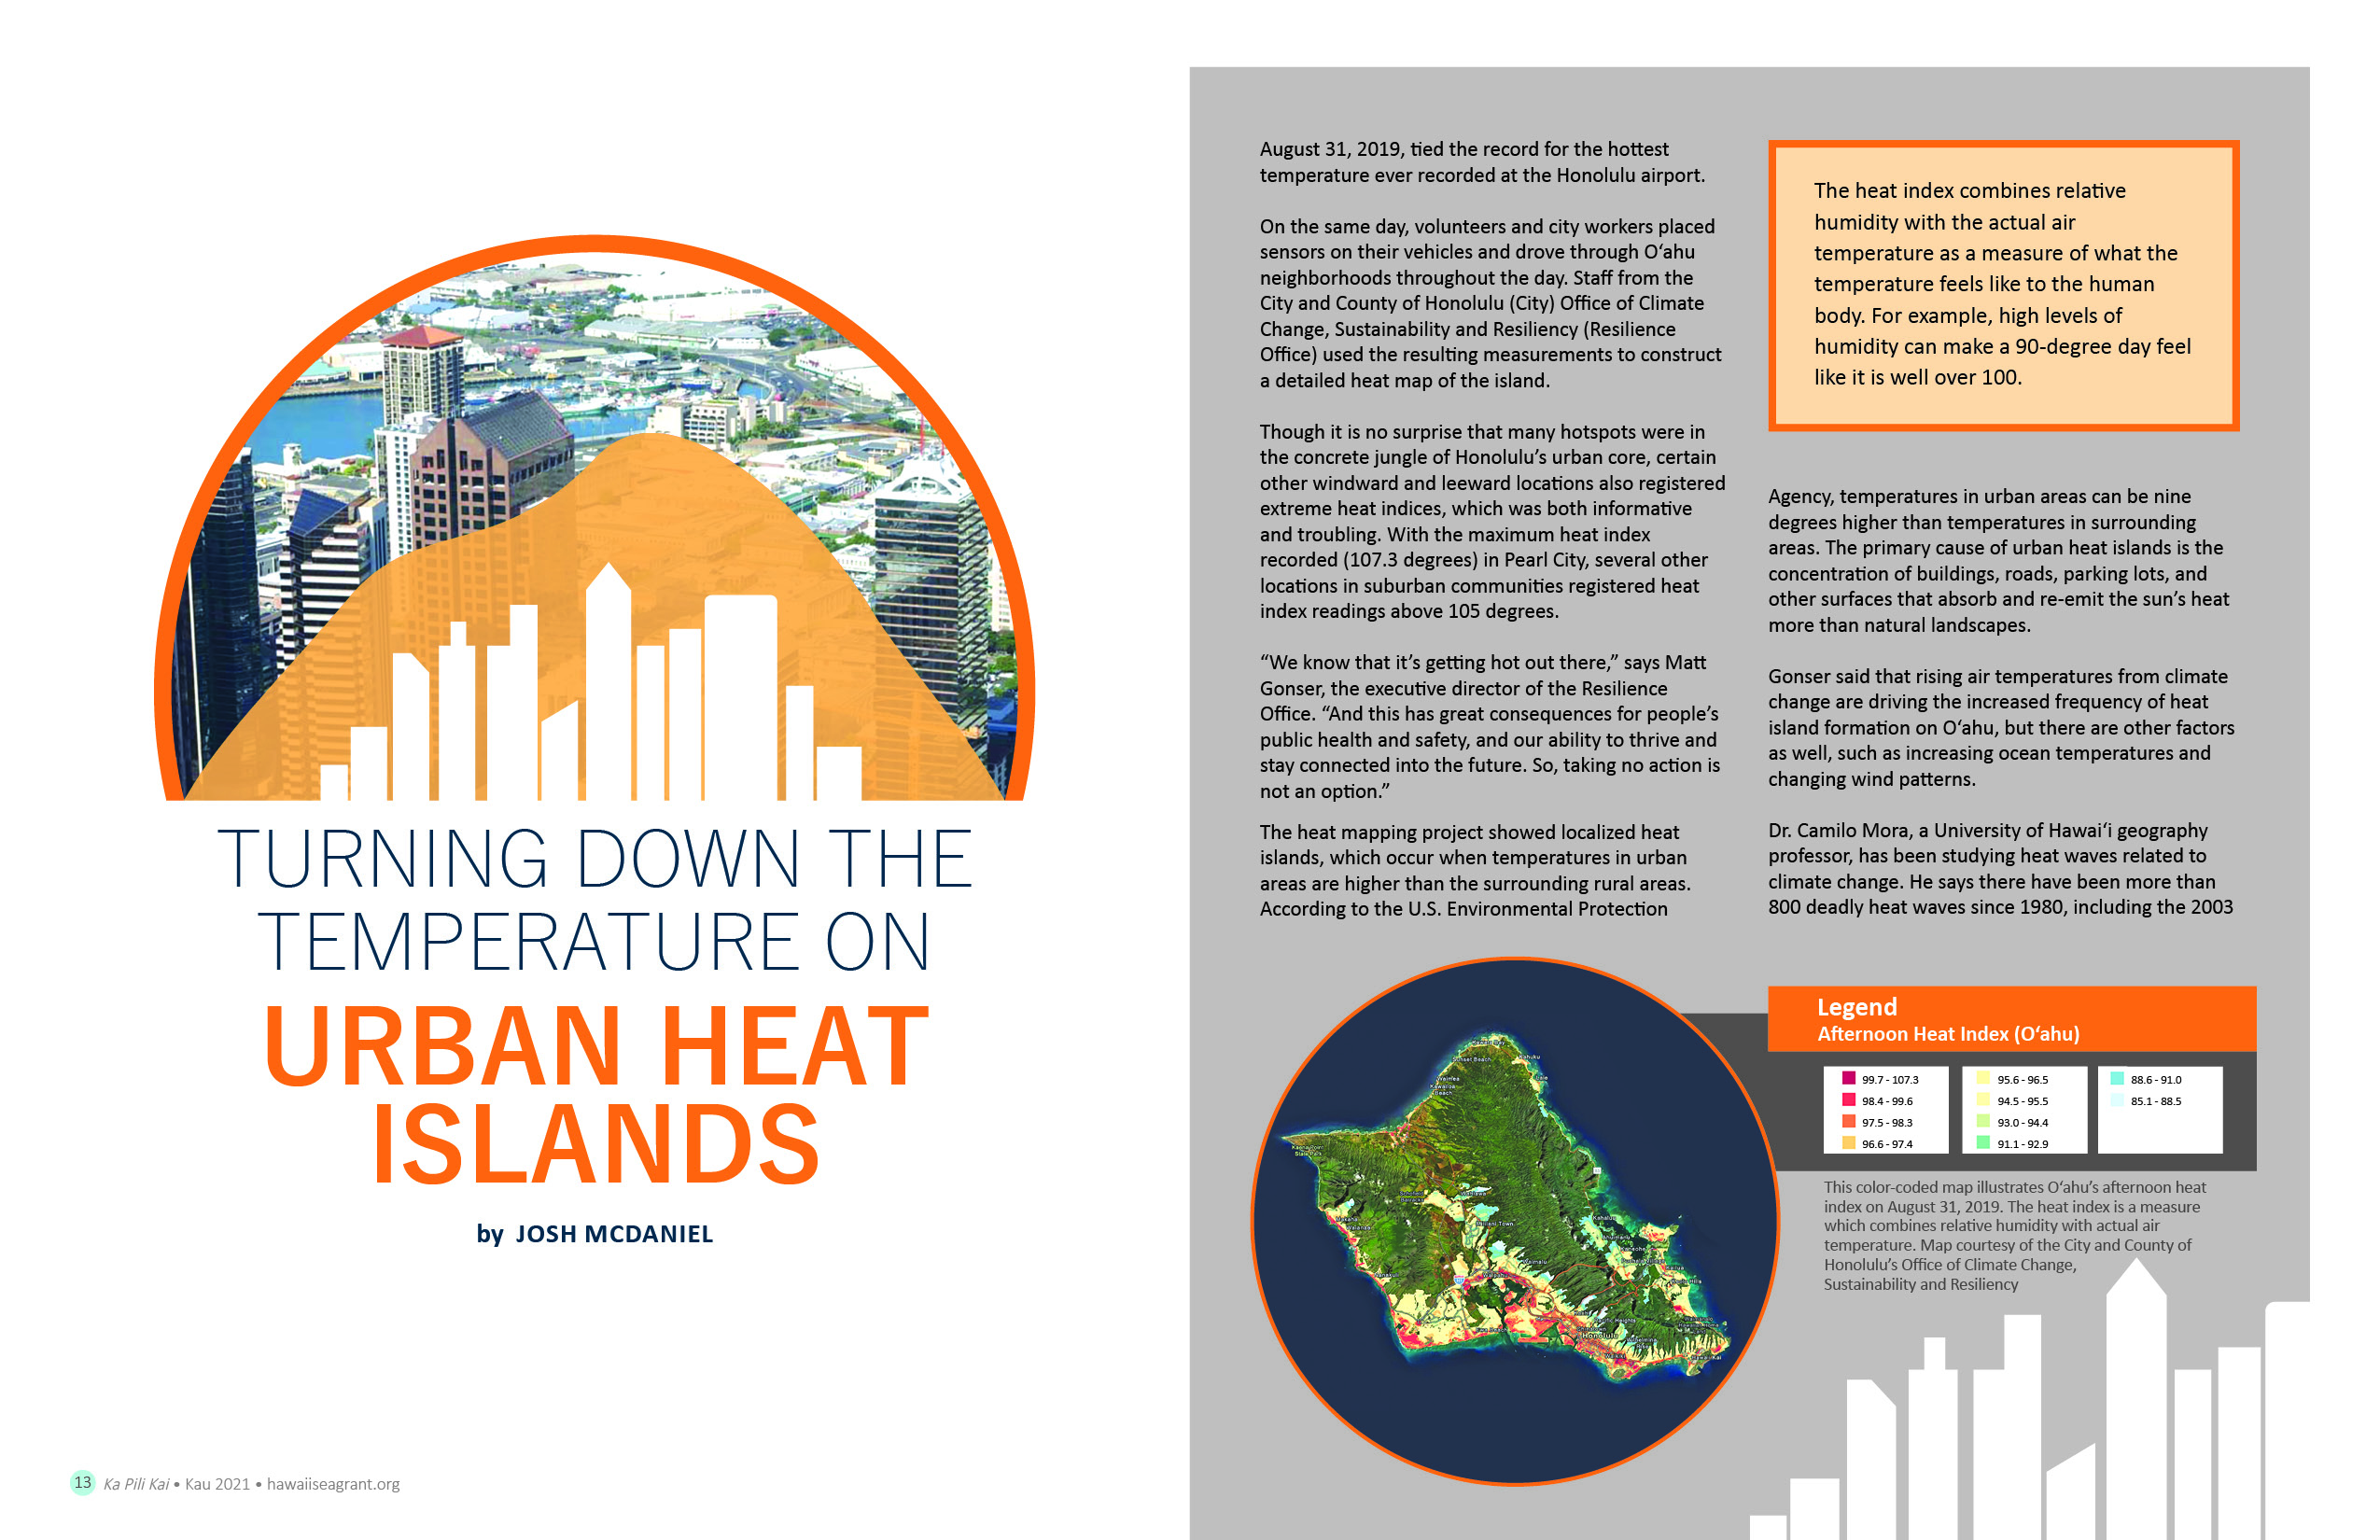 Article 'Turning Down the Temperature on Urban Heat Islands' by Josh McDaniel. Includes an aerial view image of Oahu and a map of Oahu.